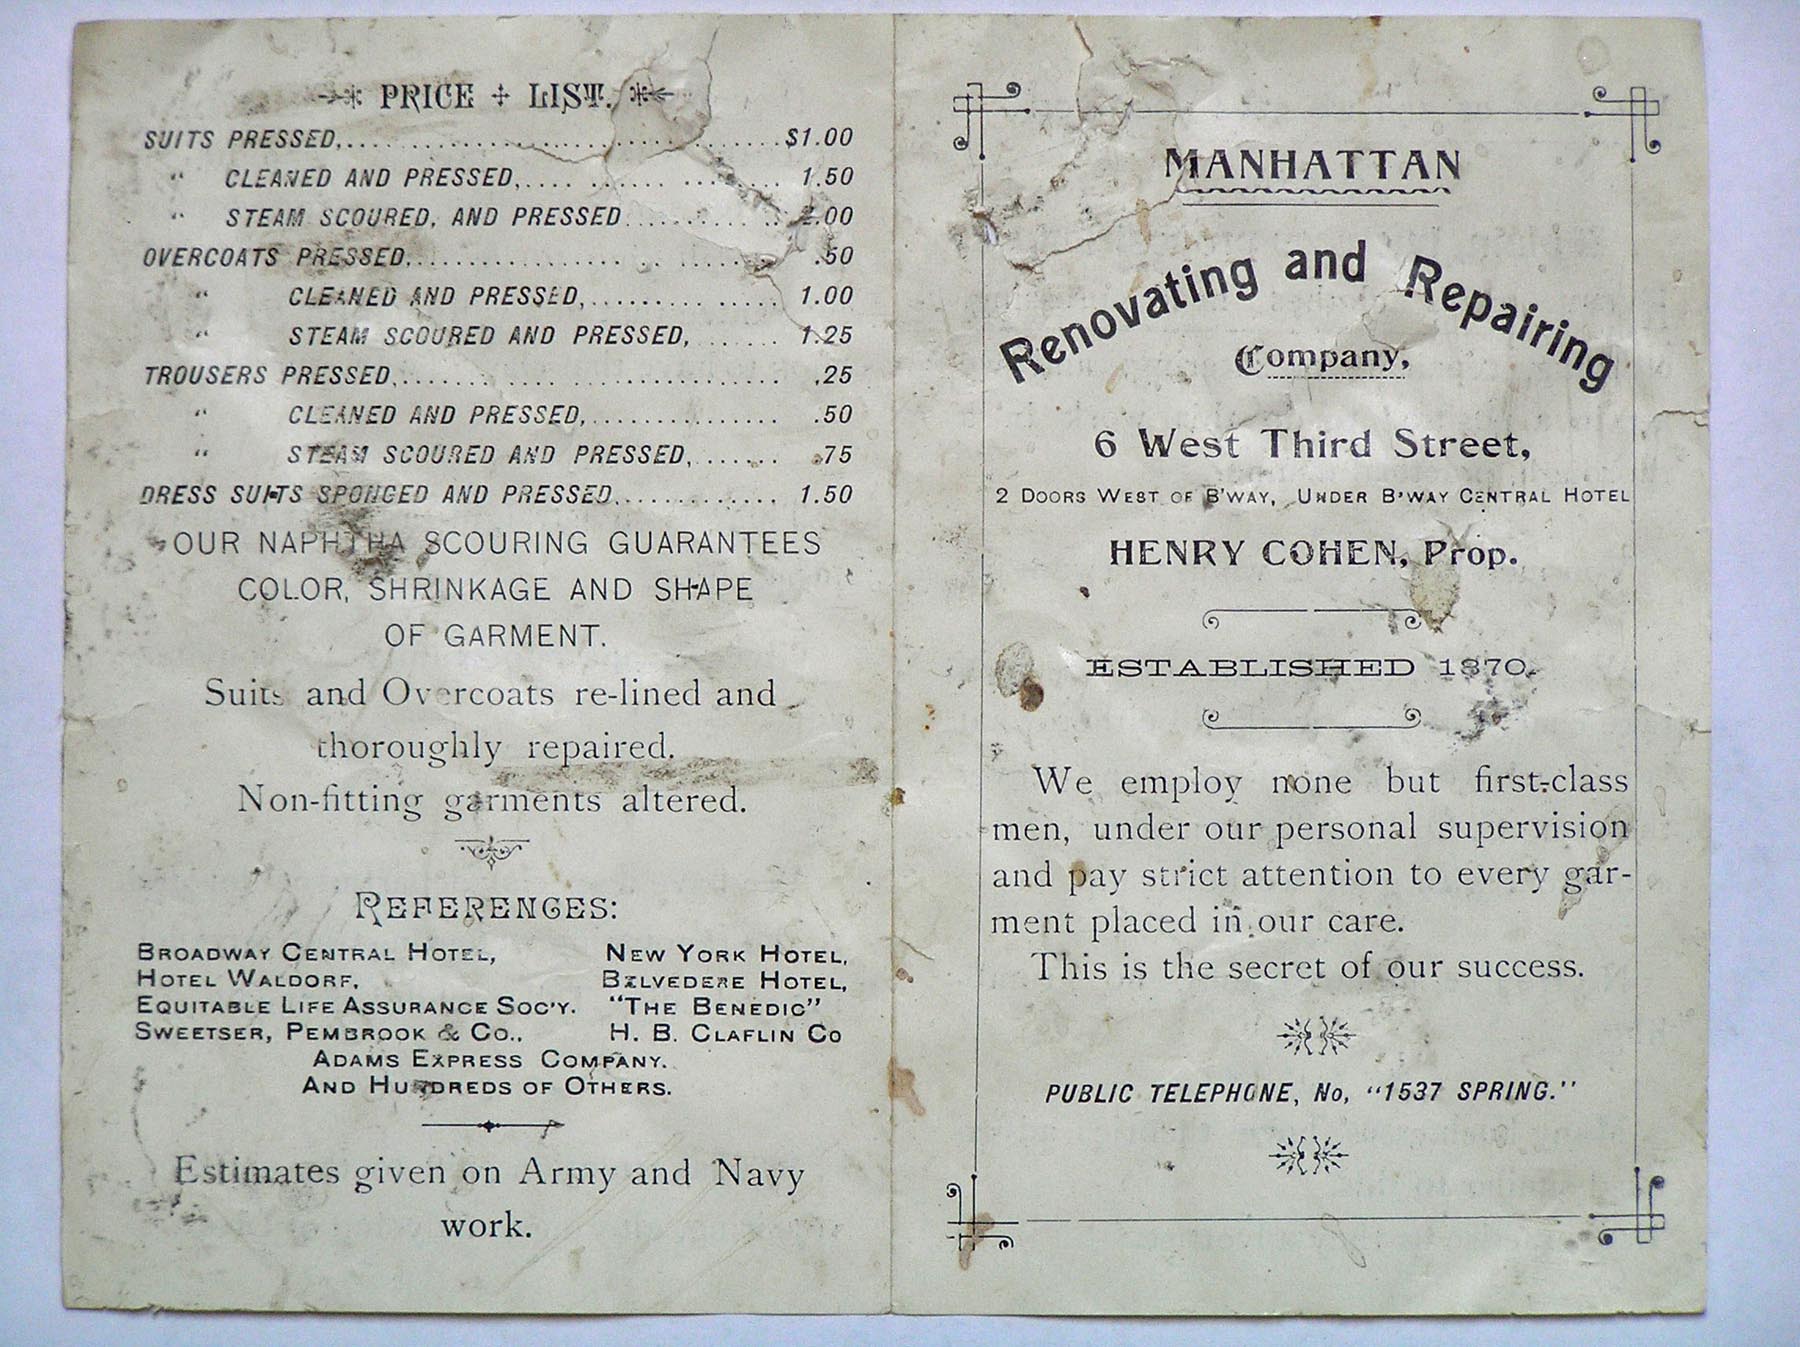 Brochure from the Manhattan Renovating and Repairing Company